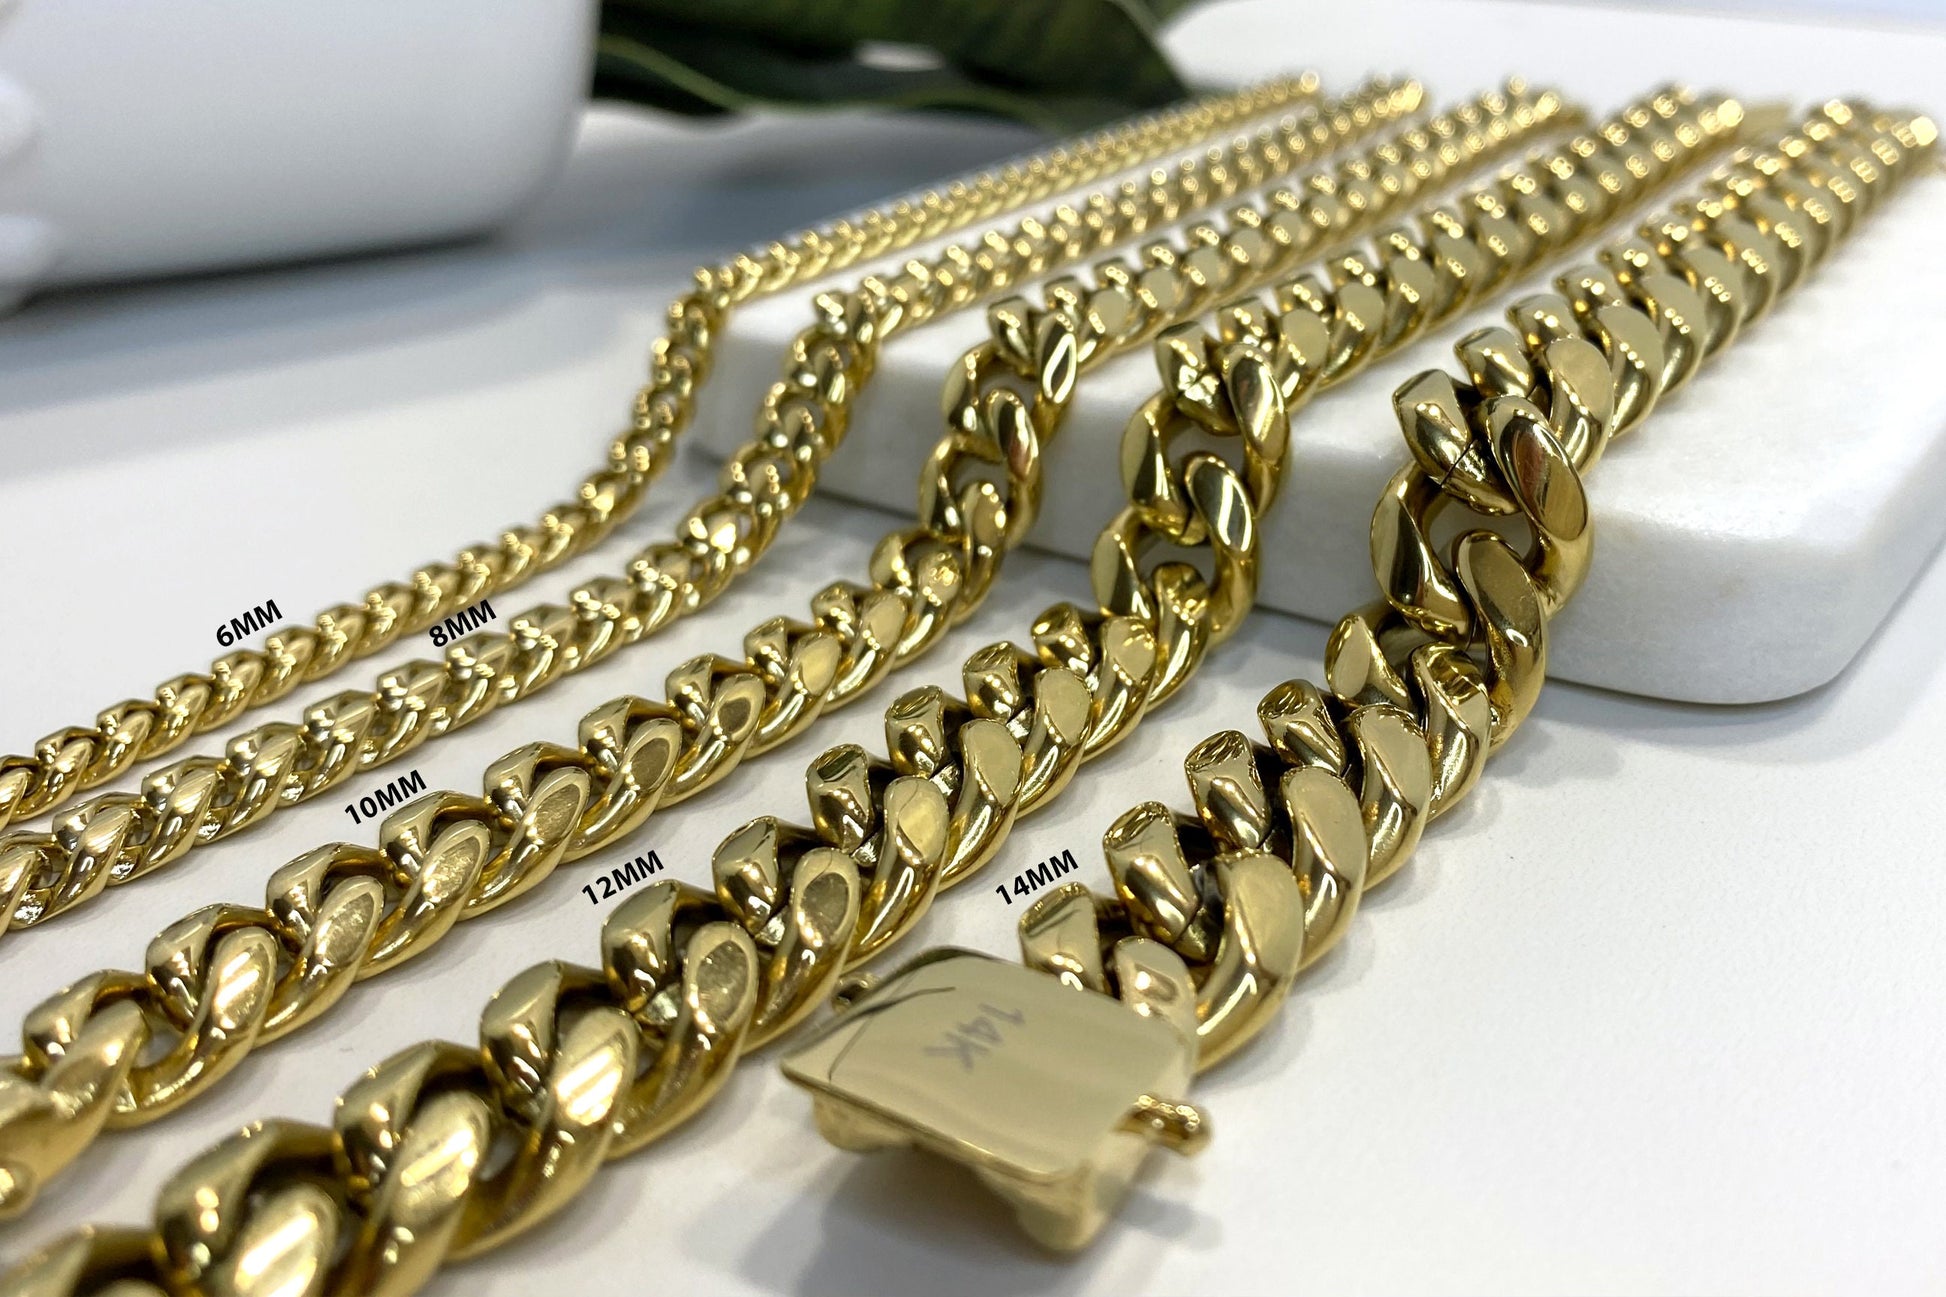 12mm Miami Cuban Link Bracelet In 14k Gold Filled Featuring Double Safety Lock Box Clasp, Unisex Curb Chain, Wholesale Jewelry Supplies